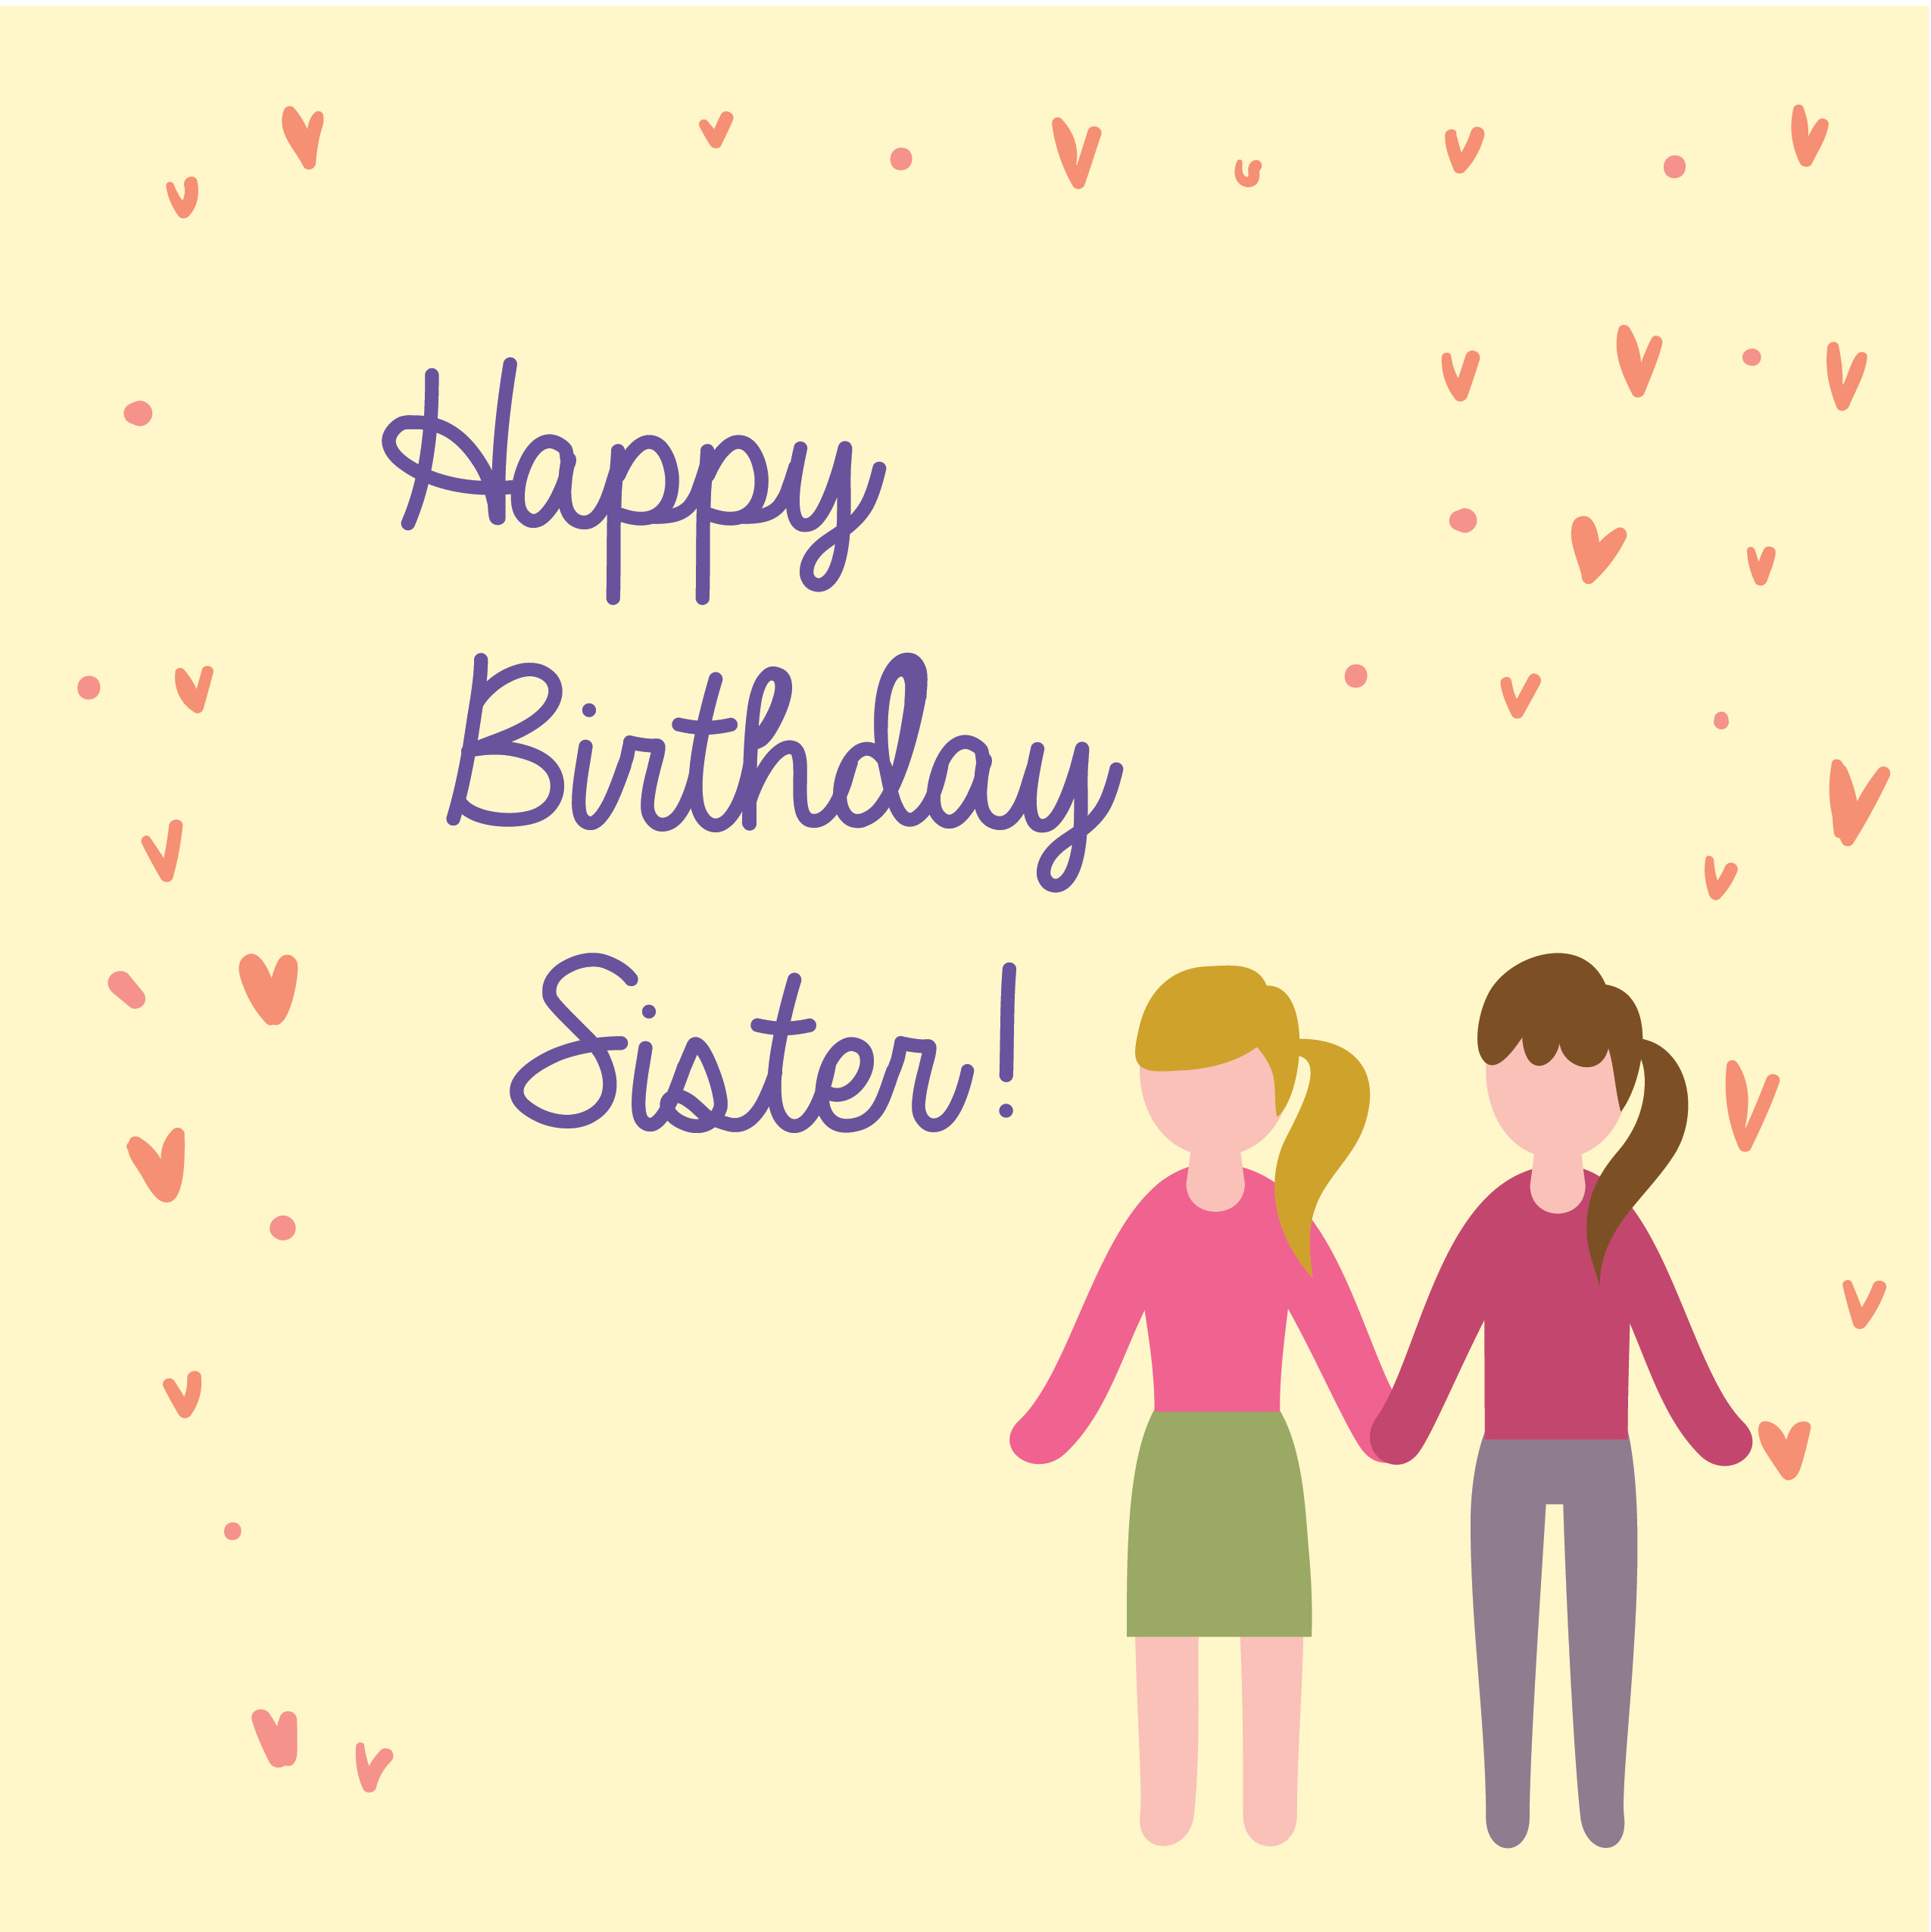 Happy Birthday Sister Quotes Funny
 200 Happy Birthday Wishes & Quotes with Funny & Cute